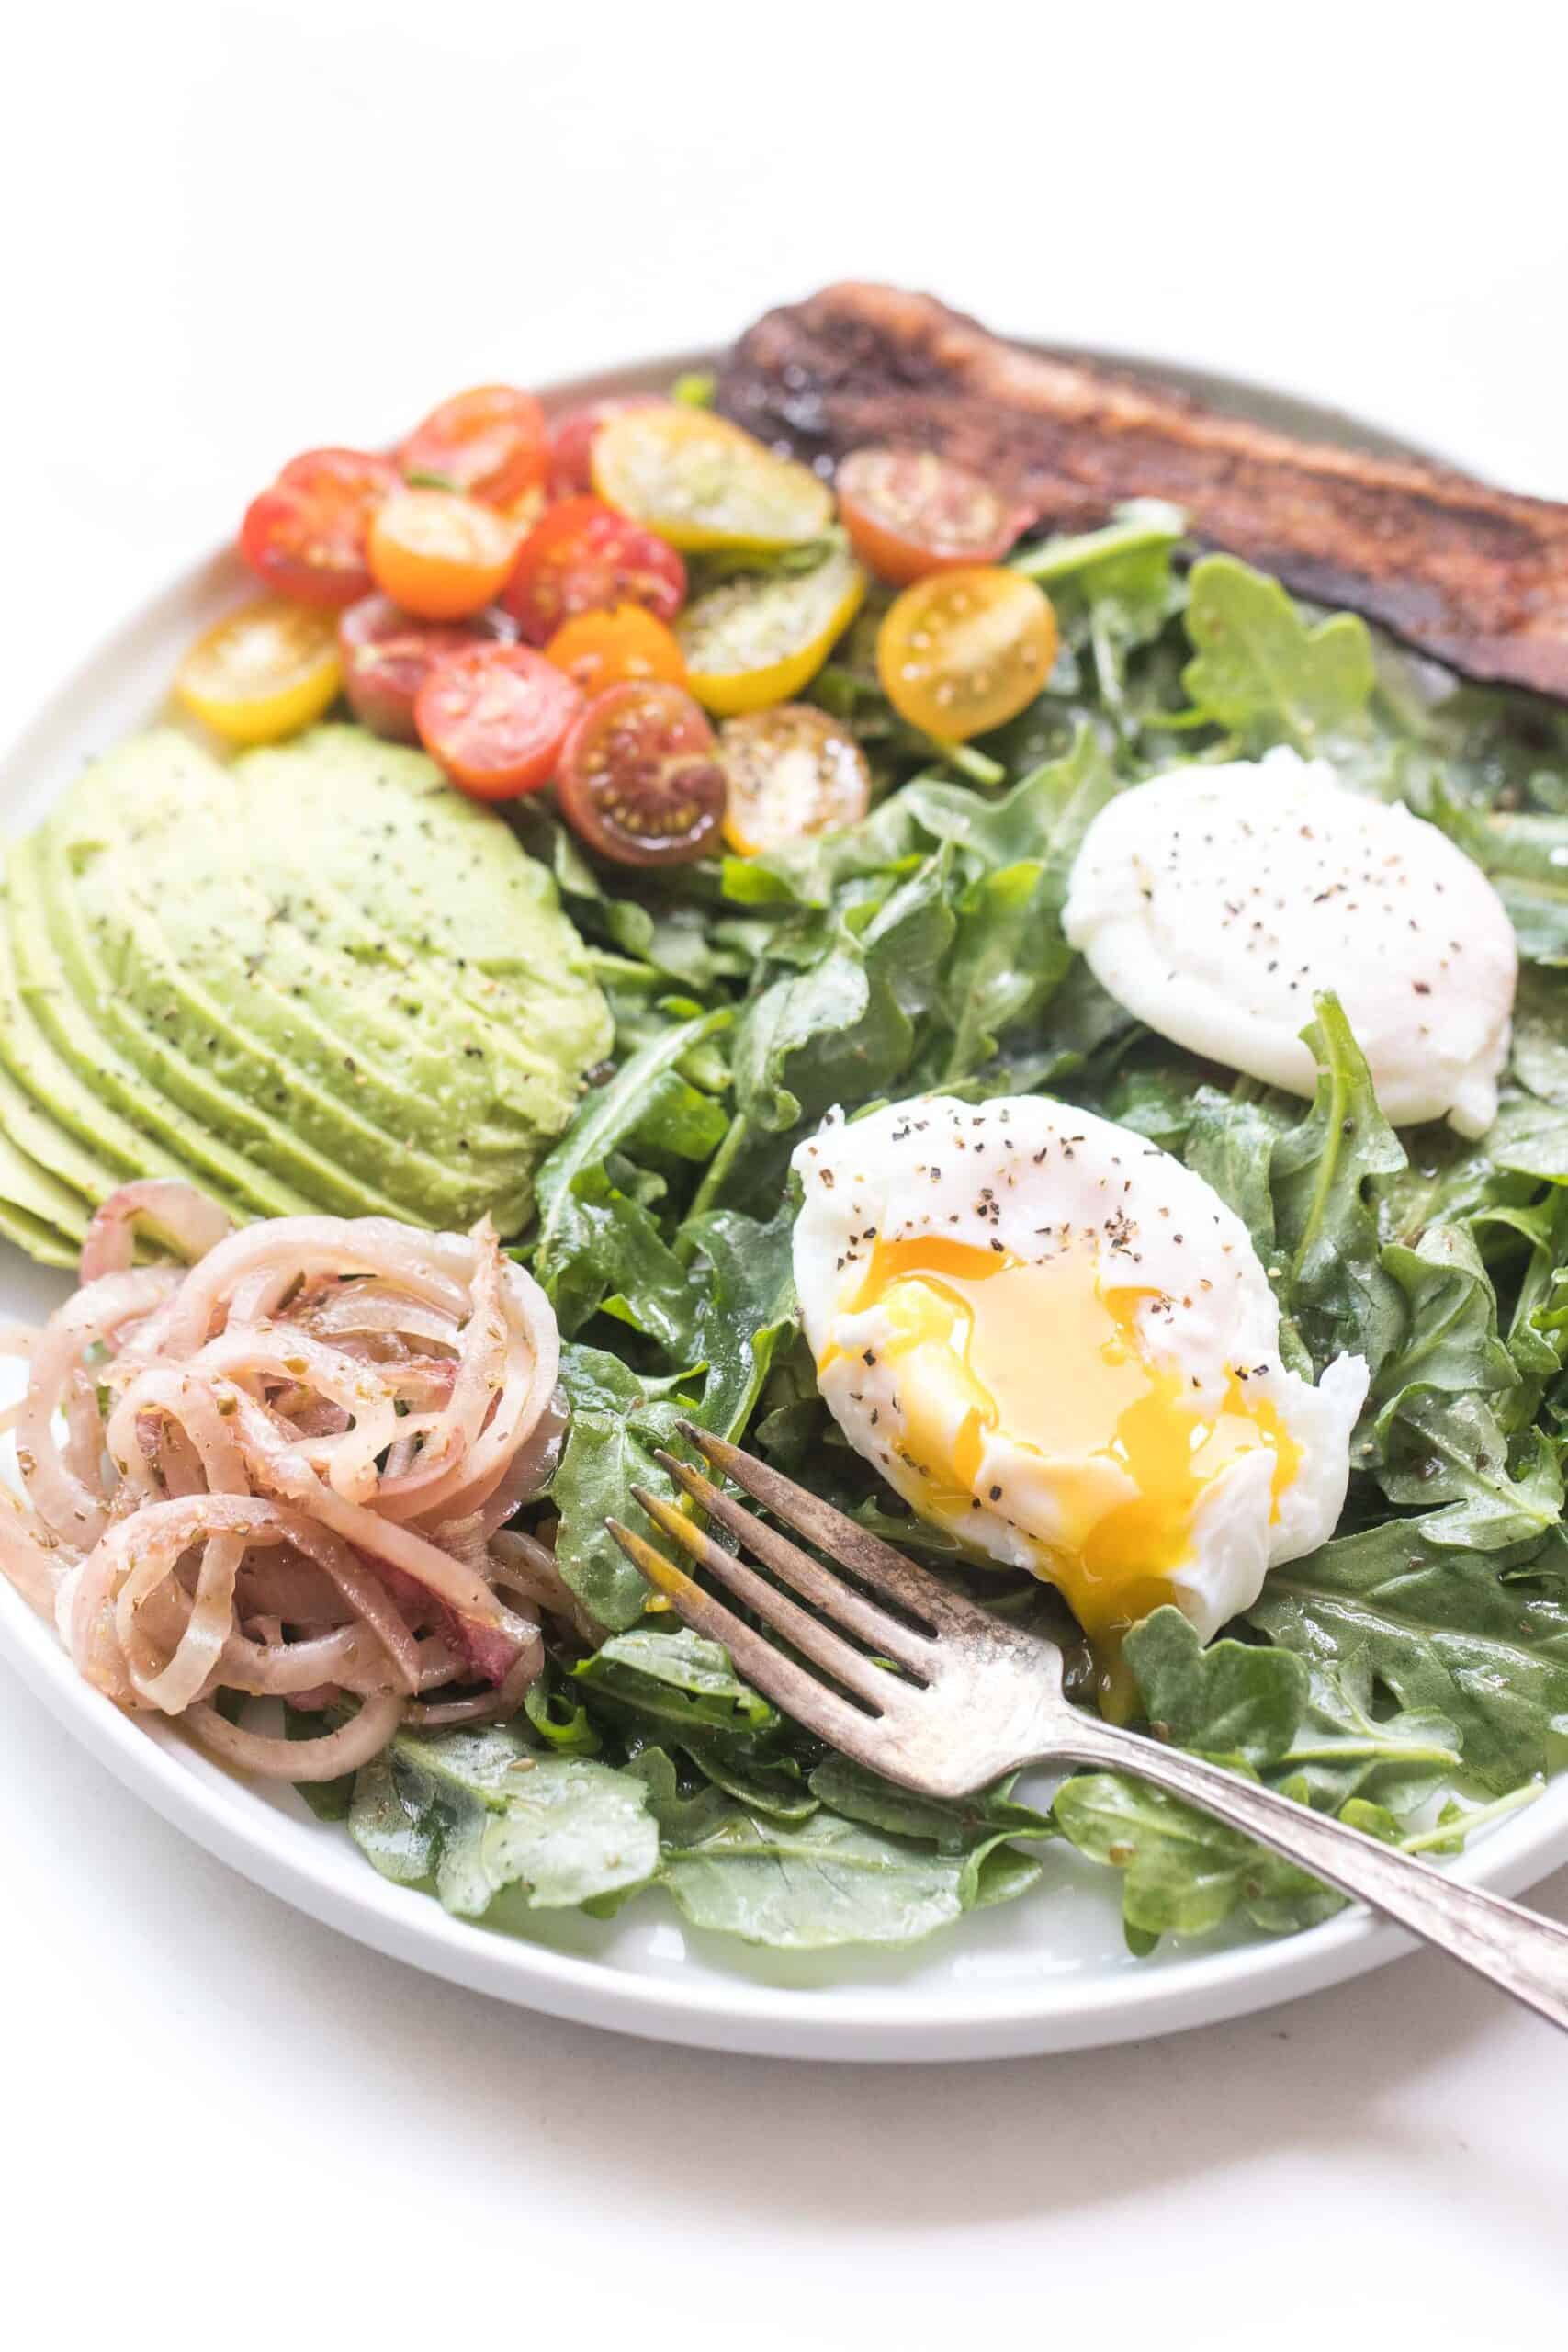 breakfast salad with baby arugula, poached egg, onions, avocado, tomato and bacon on a white plate and background